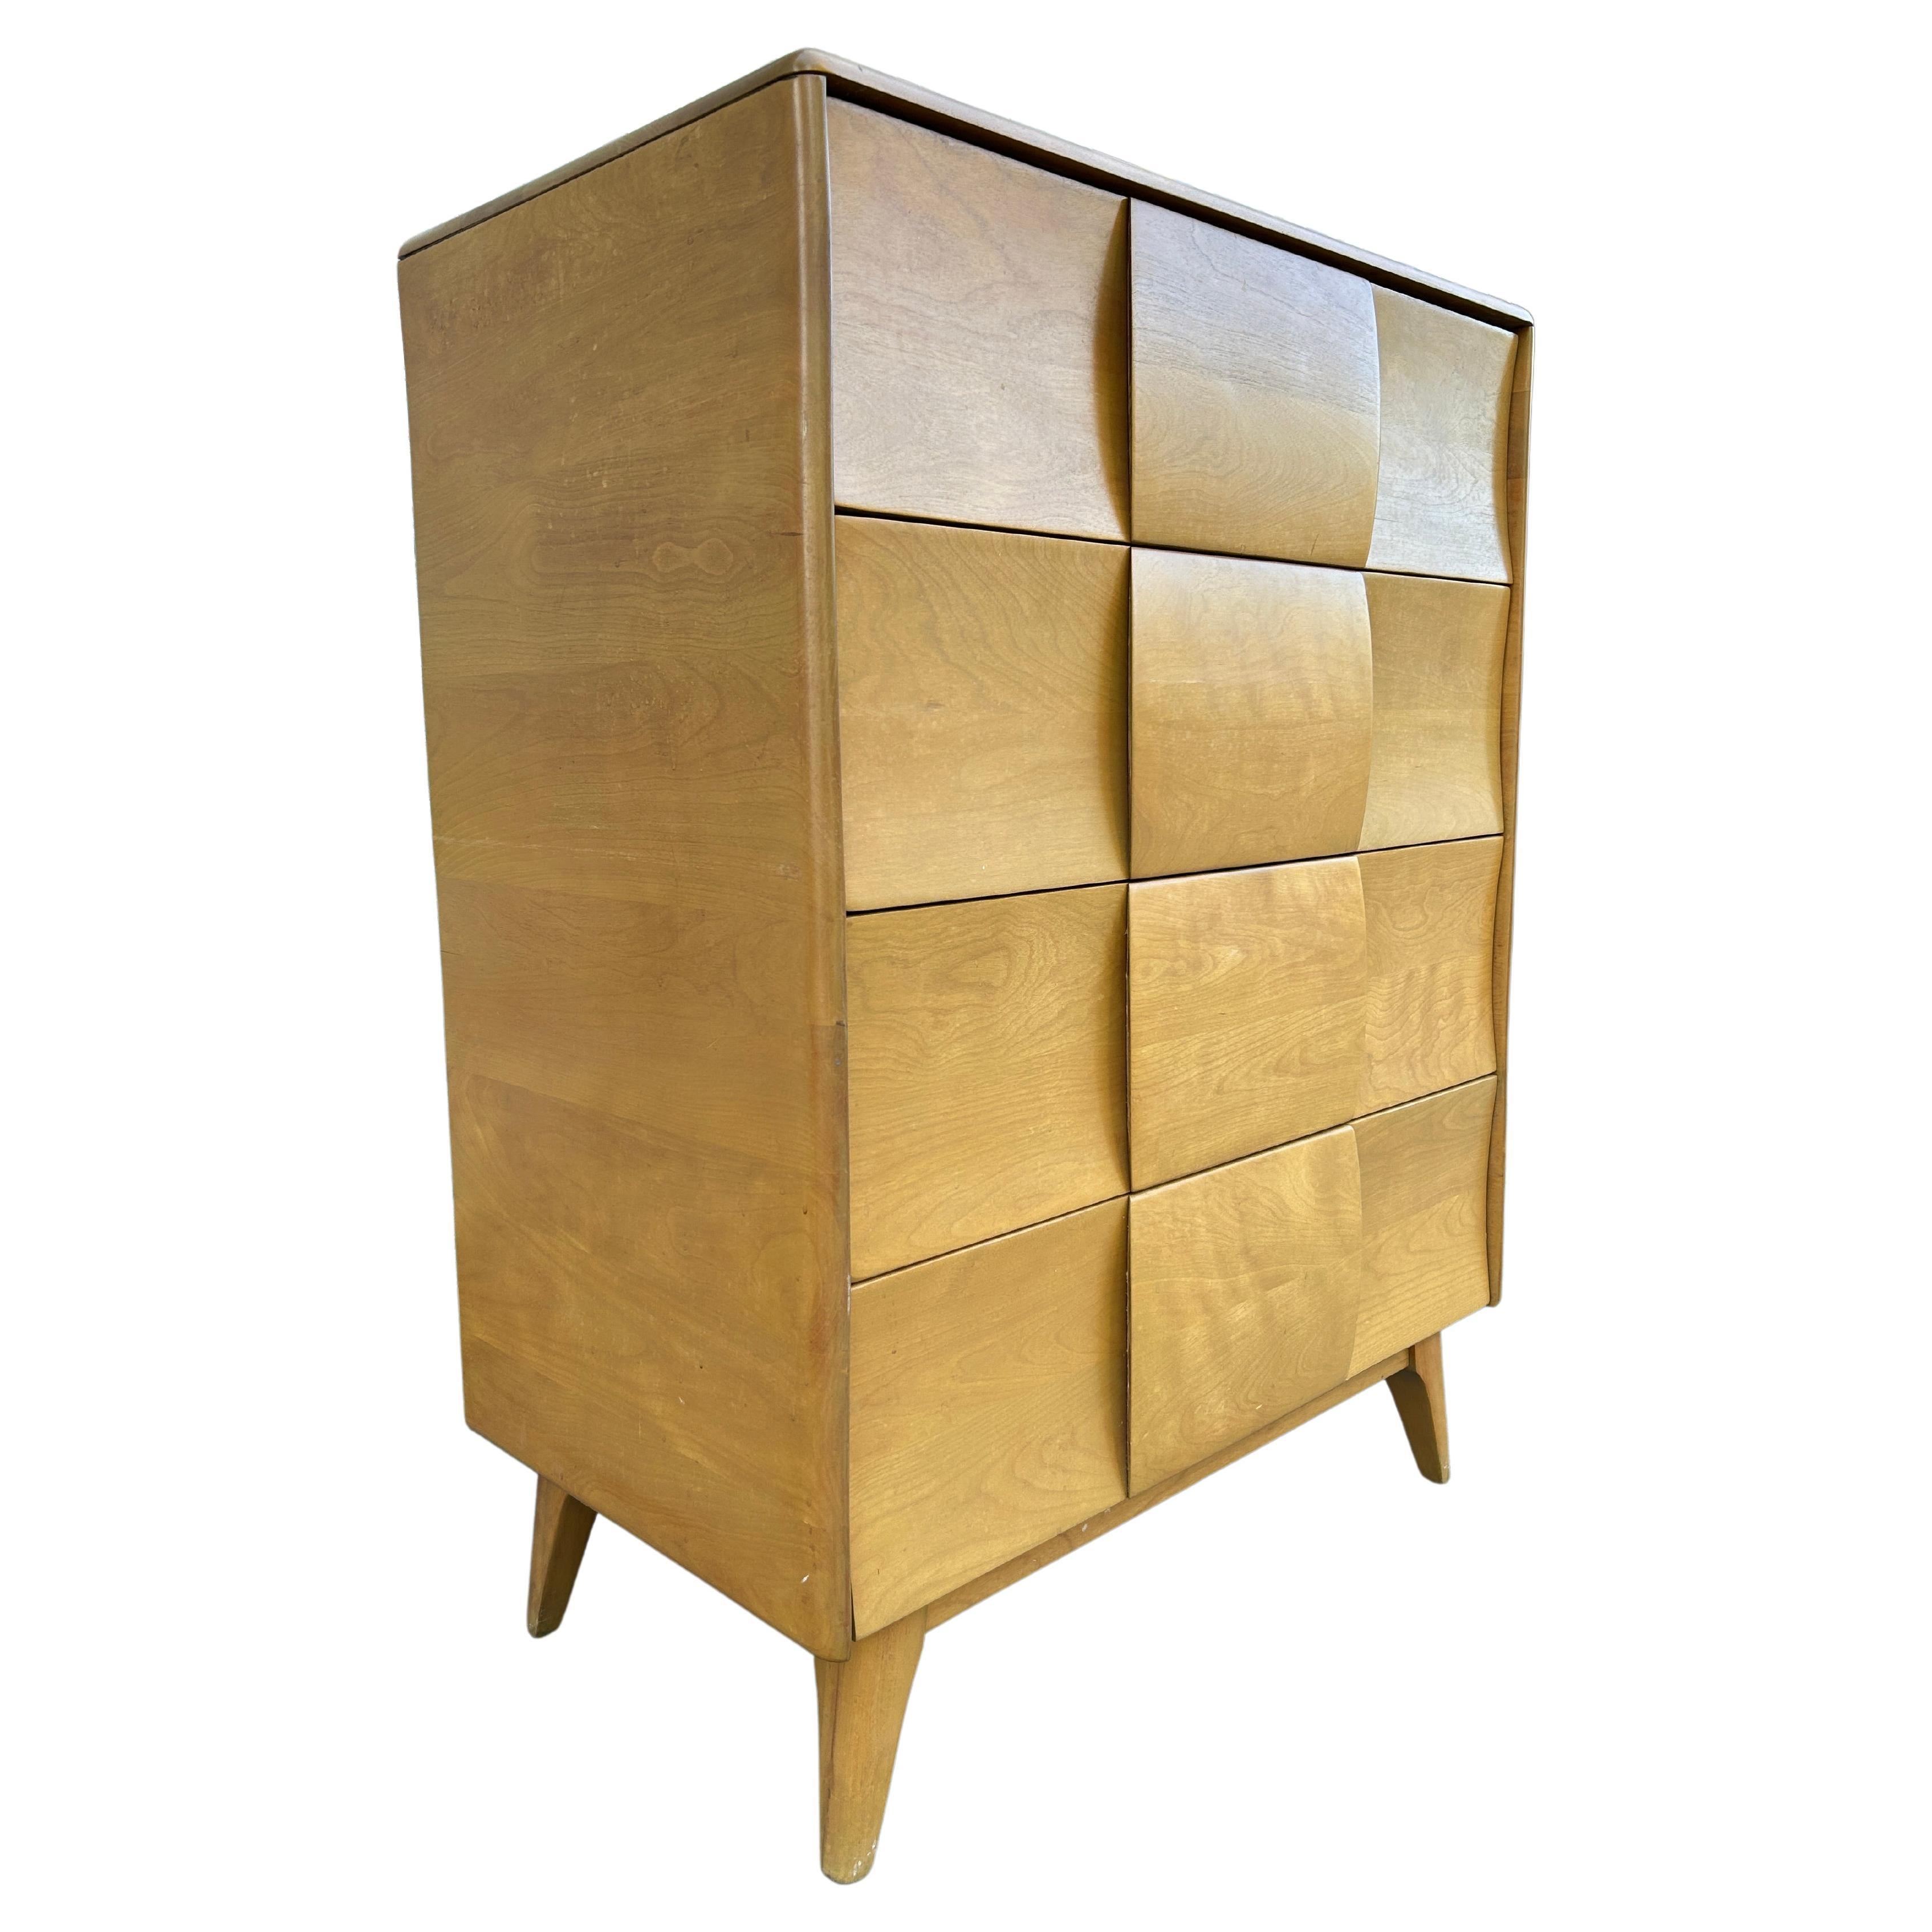 Timeless Heywood Wakefield Mid-Century Modern 4 drawer tall dresser. All solid maple construction with sculpted legs and drawer handles. Good vintage condition original blonde finish. Circa 1950 - Located in Brooklyn NYC.

Measures 45 inches high